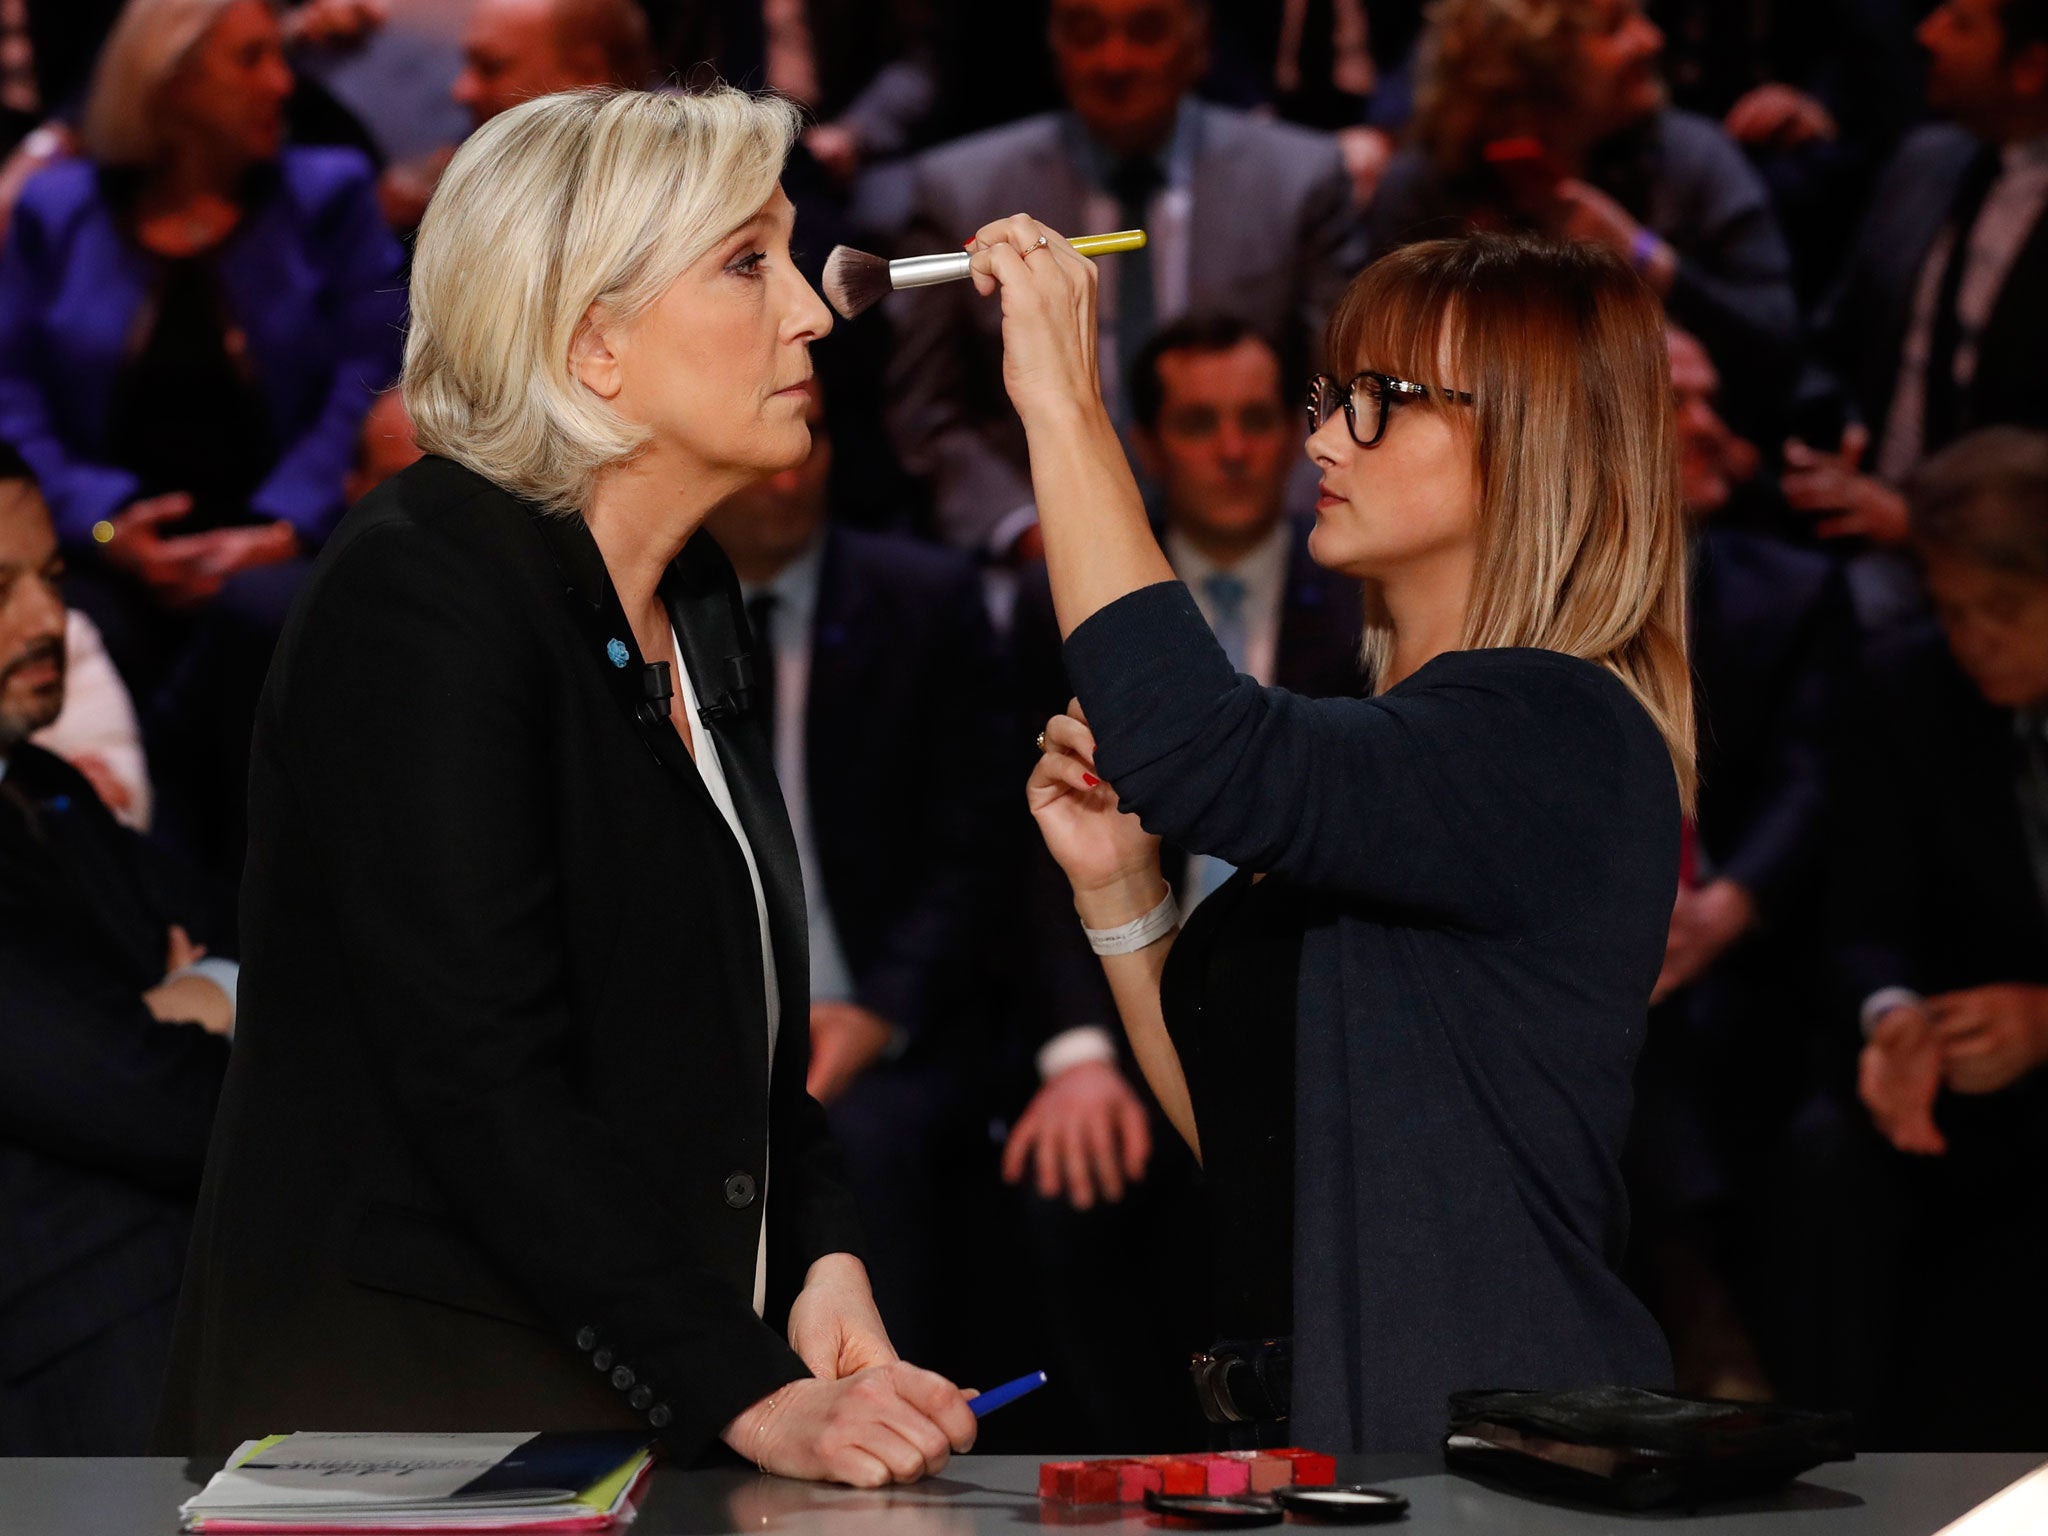 Marine Le Pen receives make-up prior to the start of the TV debate